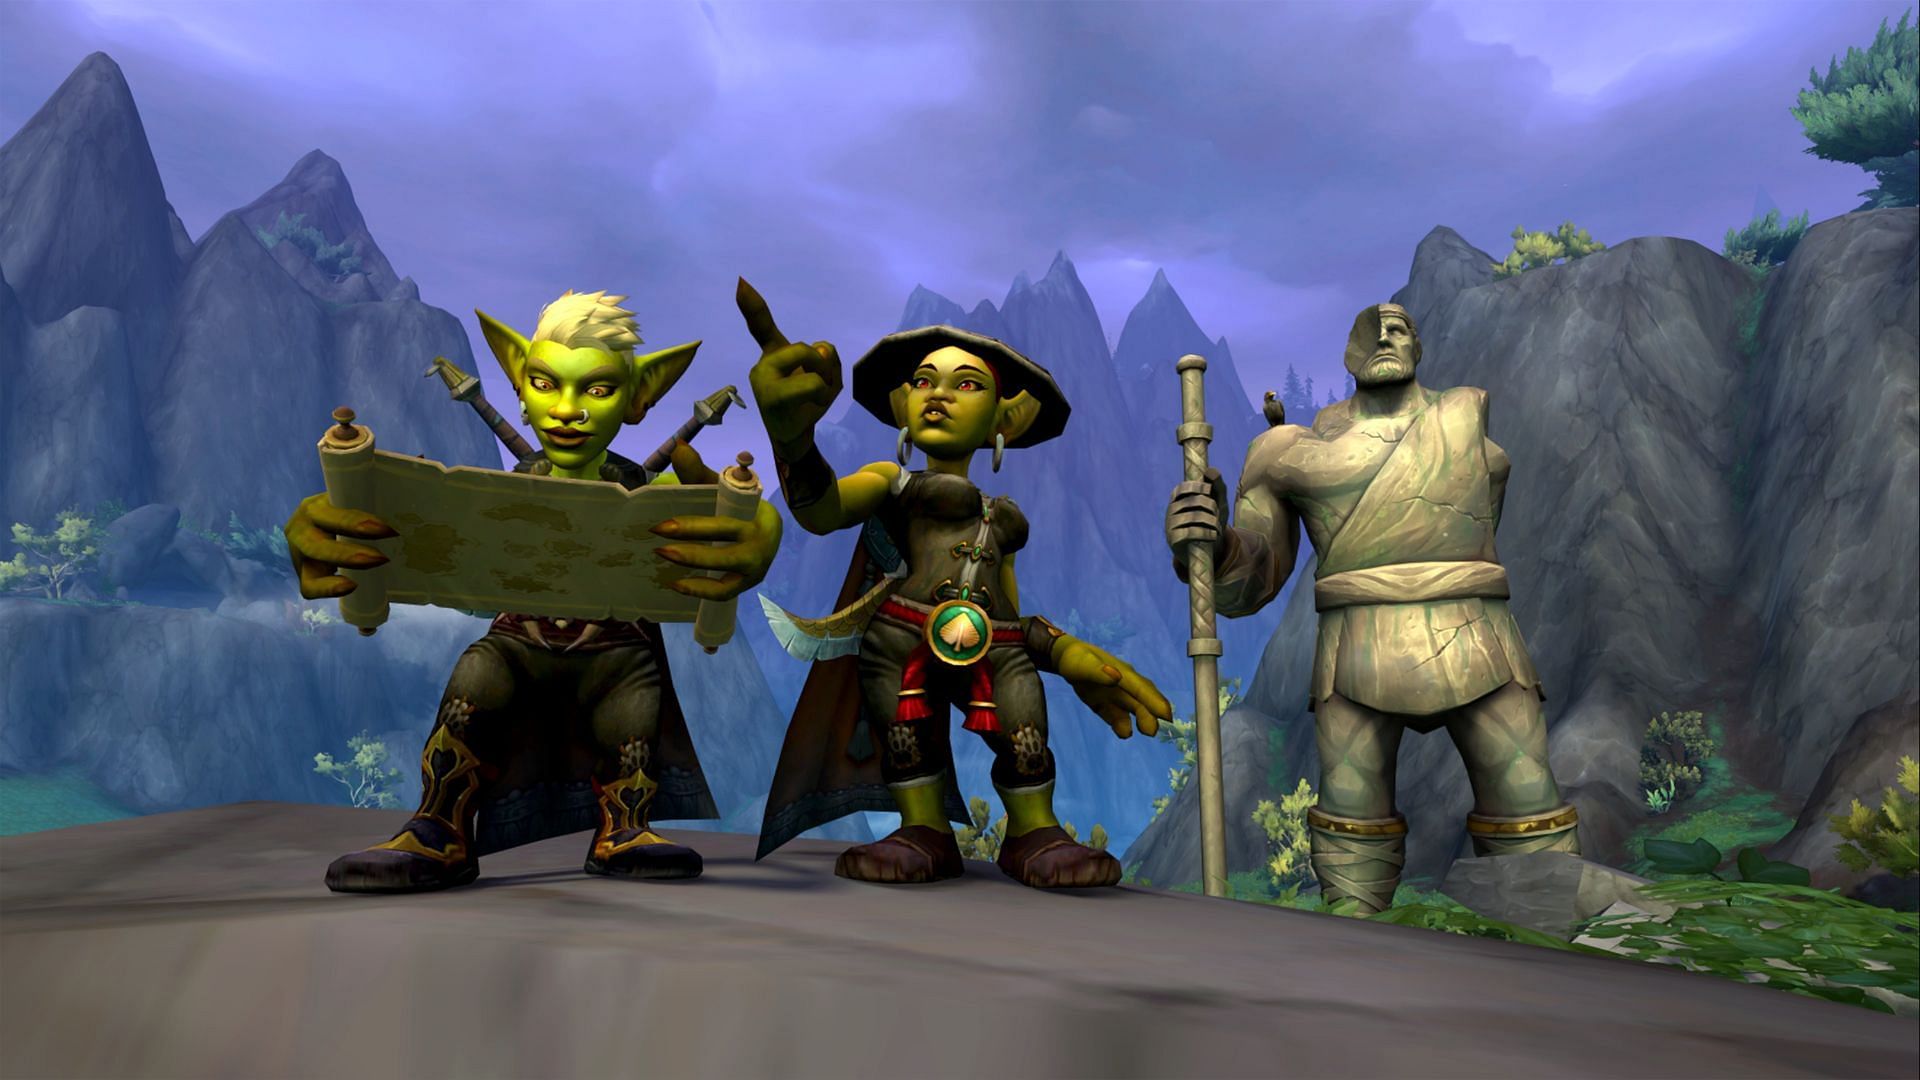 World of Warcraft: Dragonflight has an easy way to catch up and gear up.